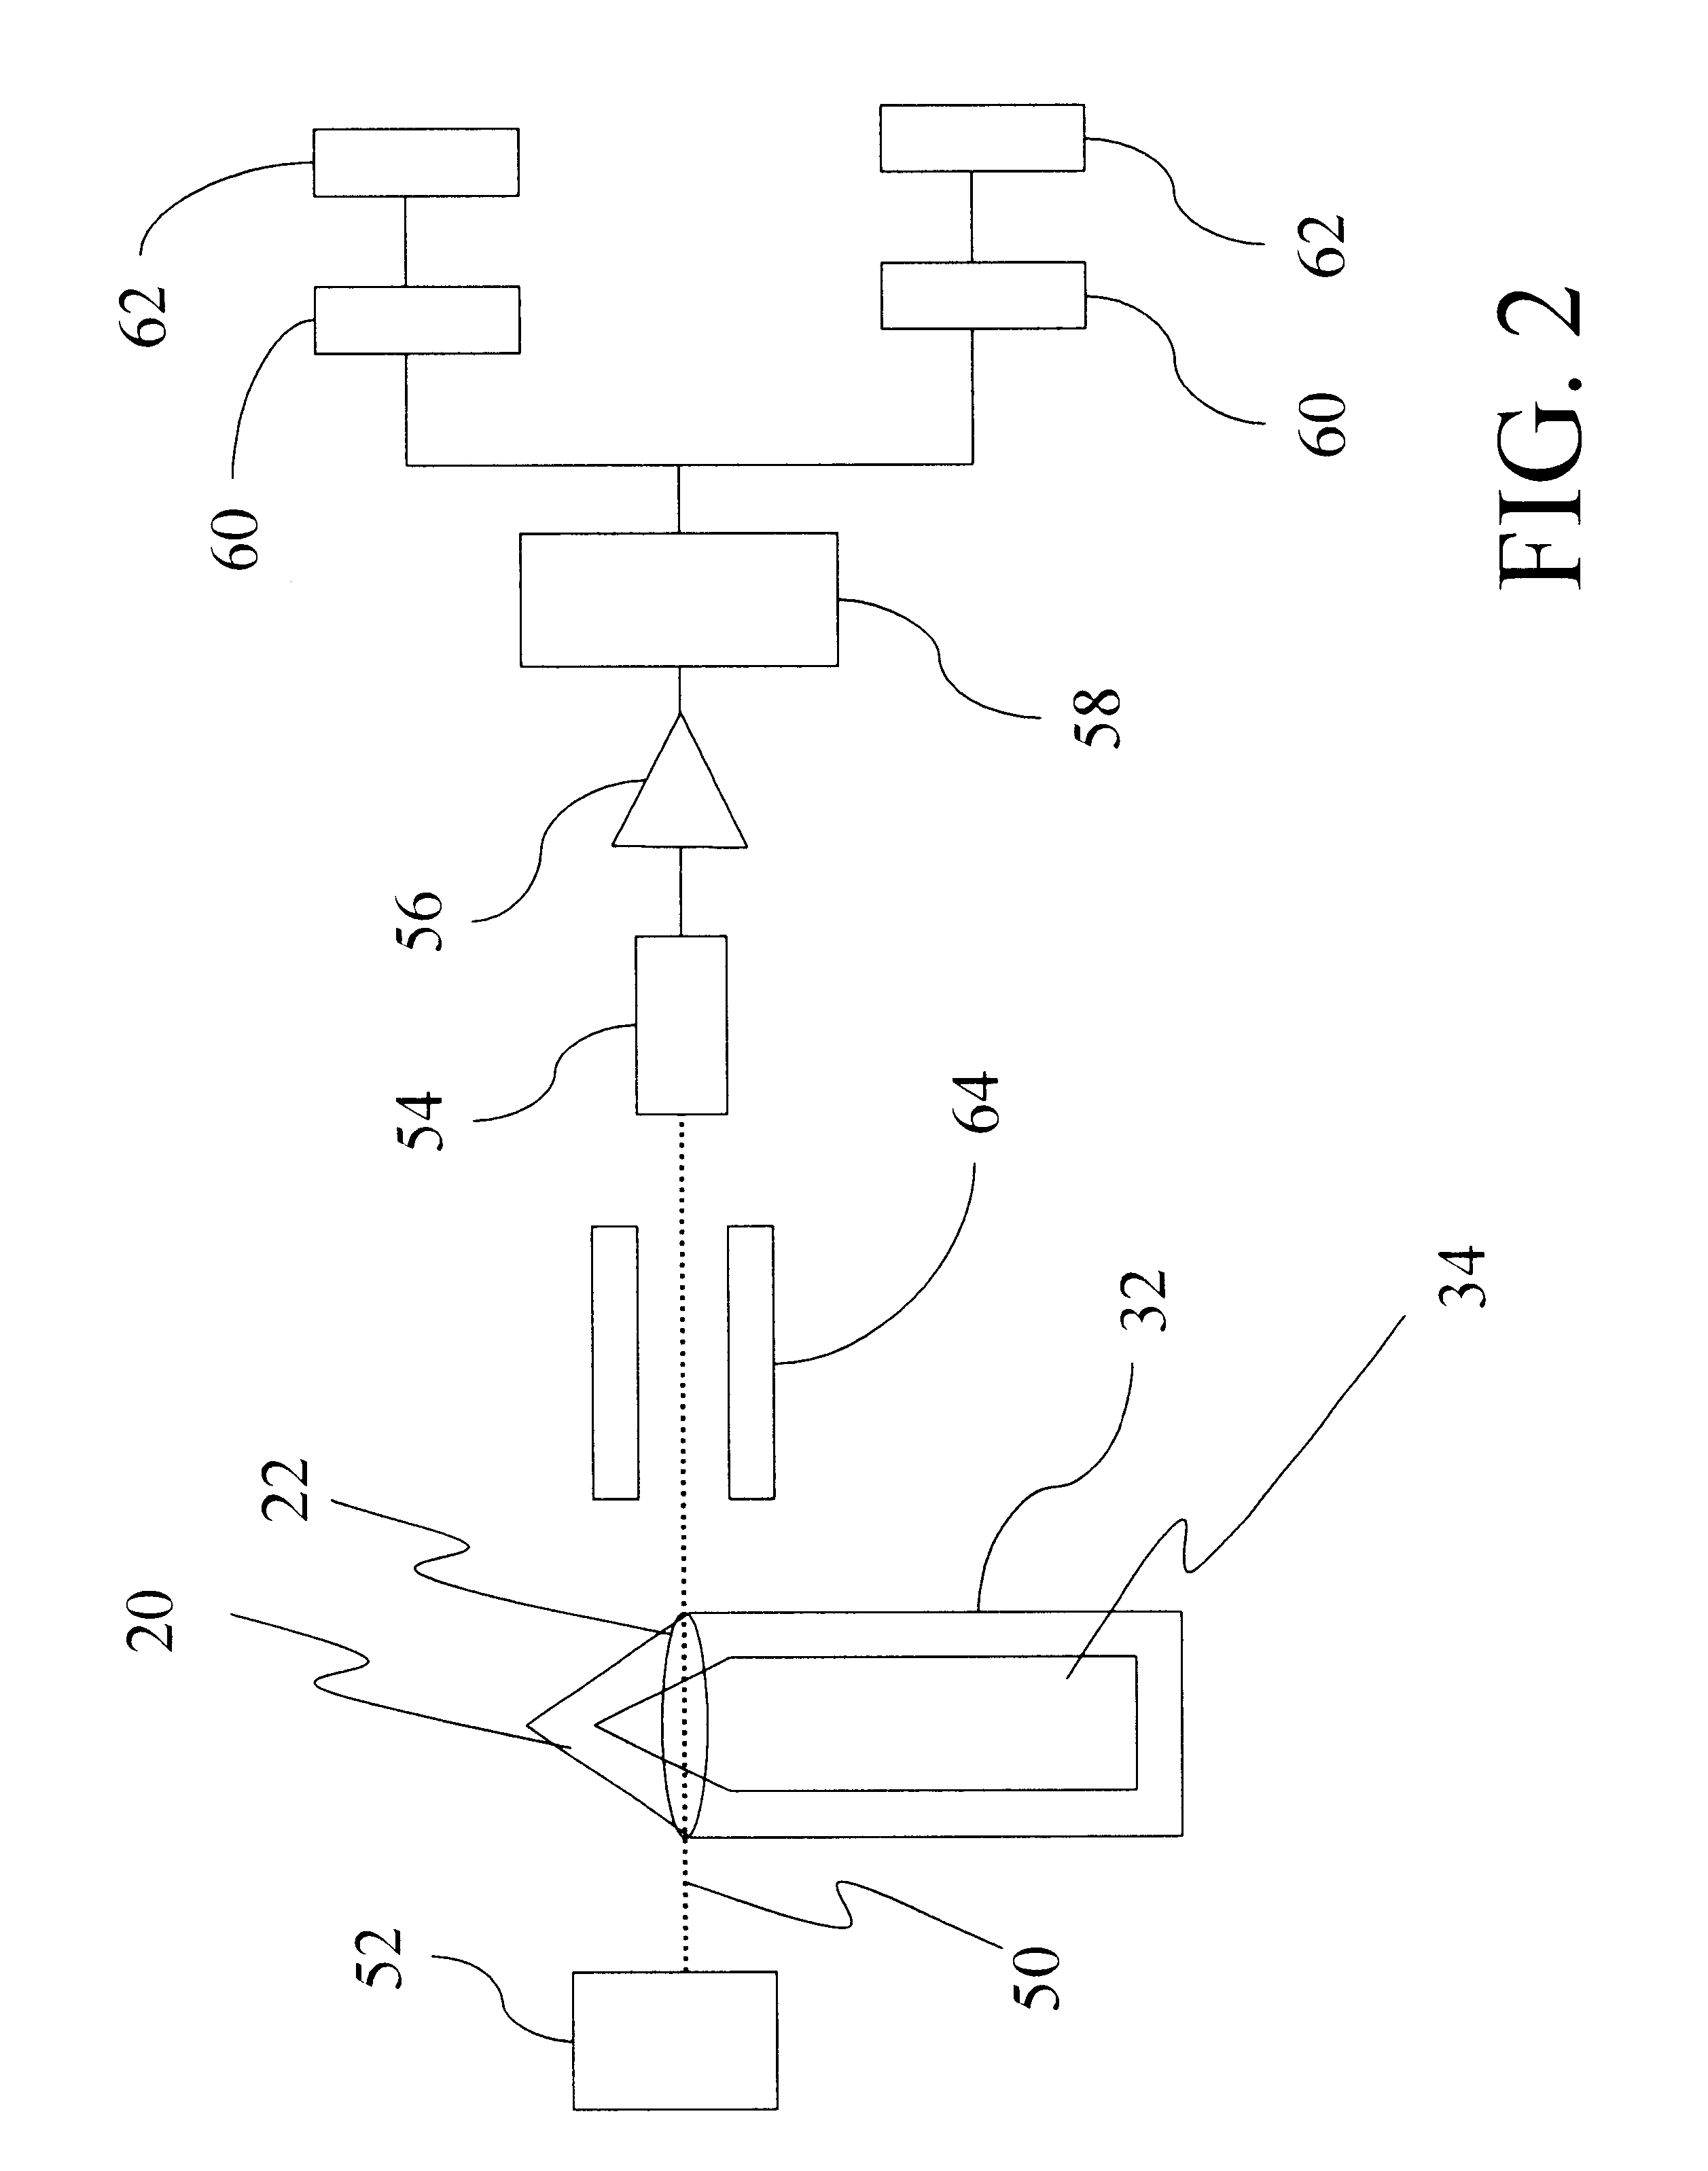 Method for non-intrusively identifying a contained material utilizing uncollided nuclear transmission measurements